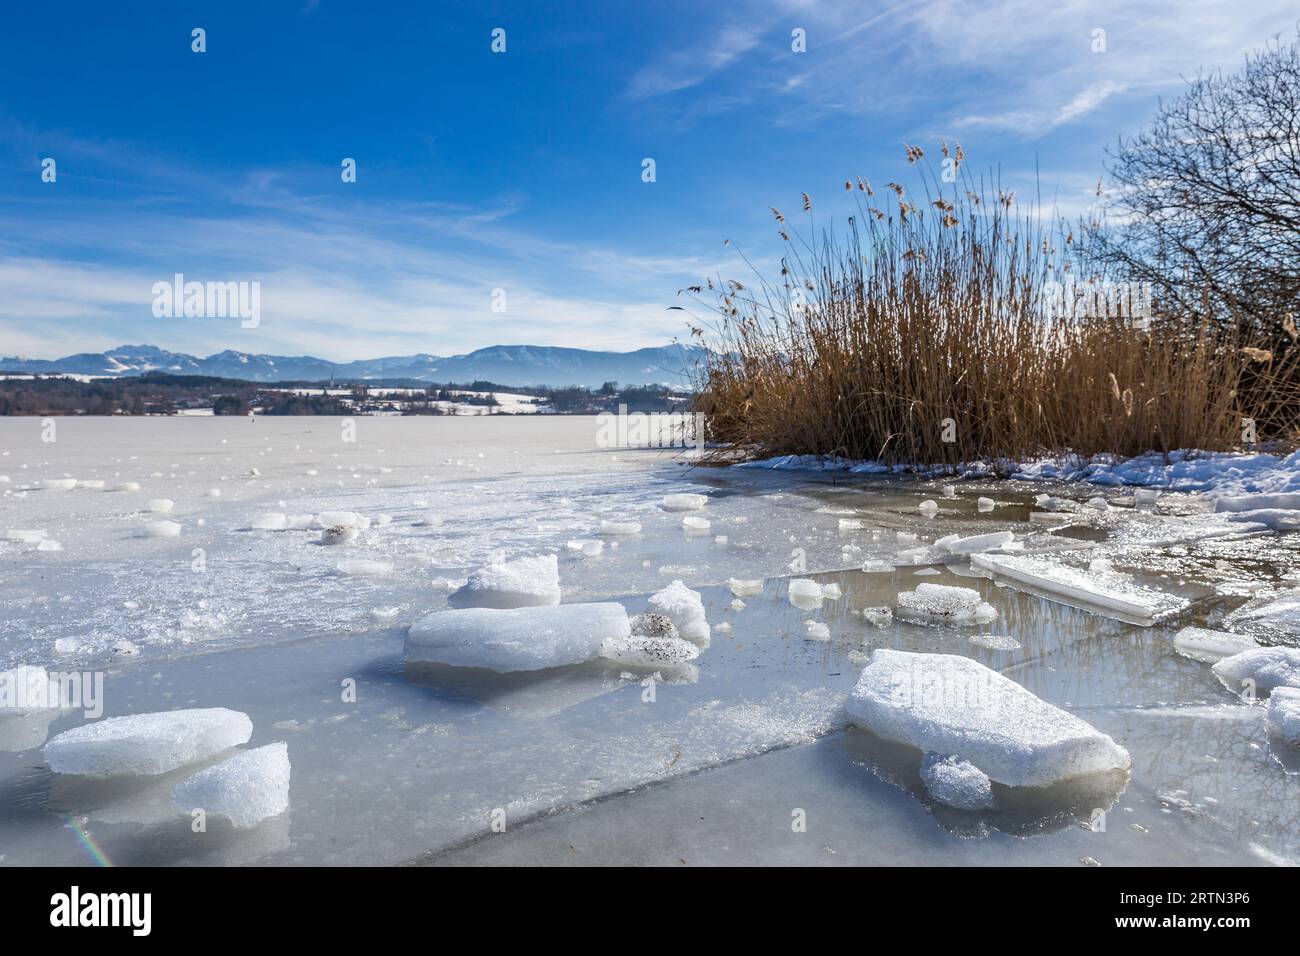 Frozen Lake “Simssee” and Reeds in front of Snowy Mountains in Bavaria, Germany, Europe Stock Photo